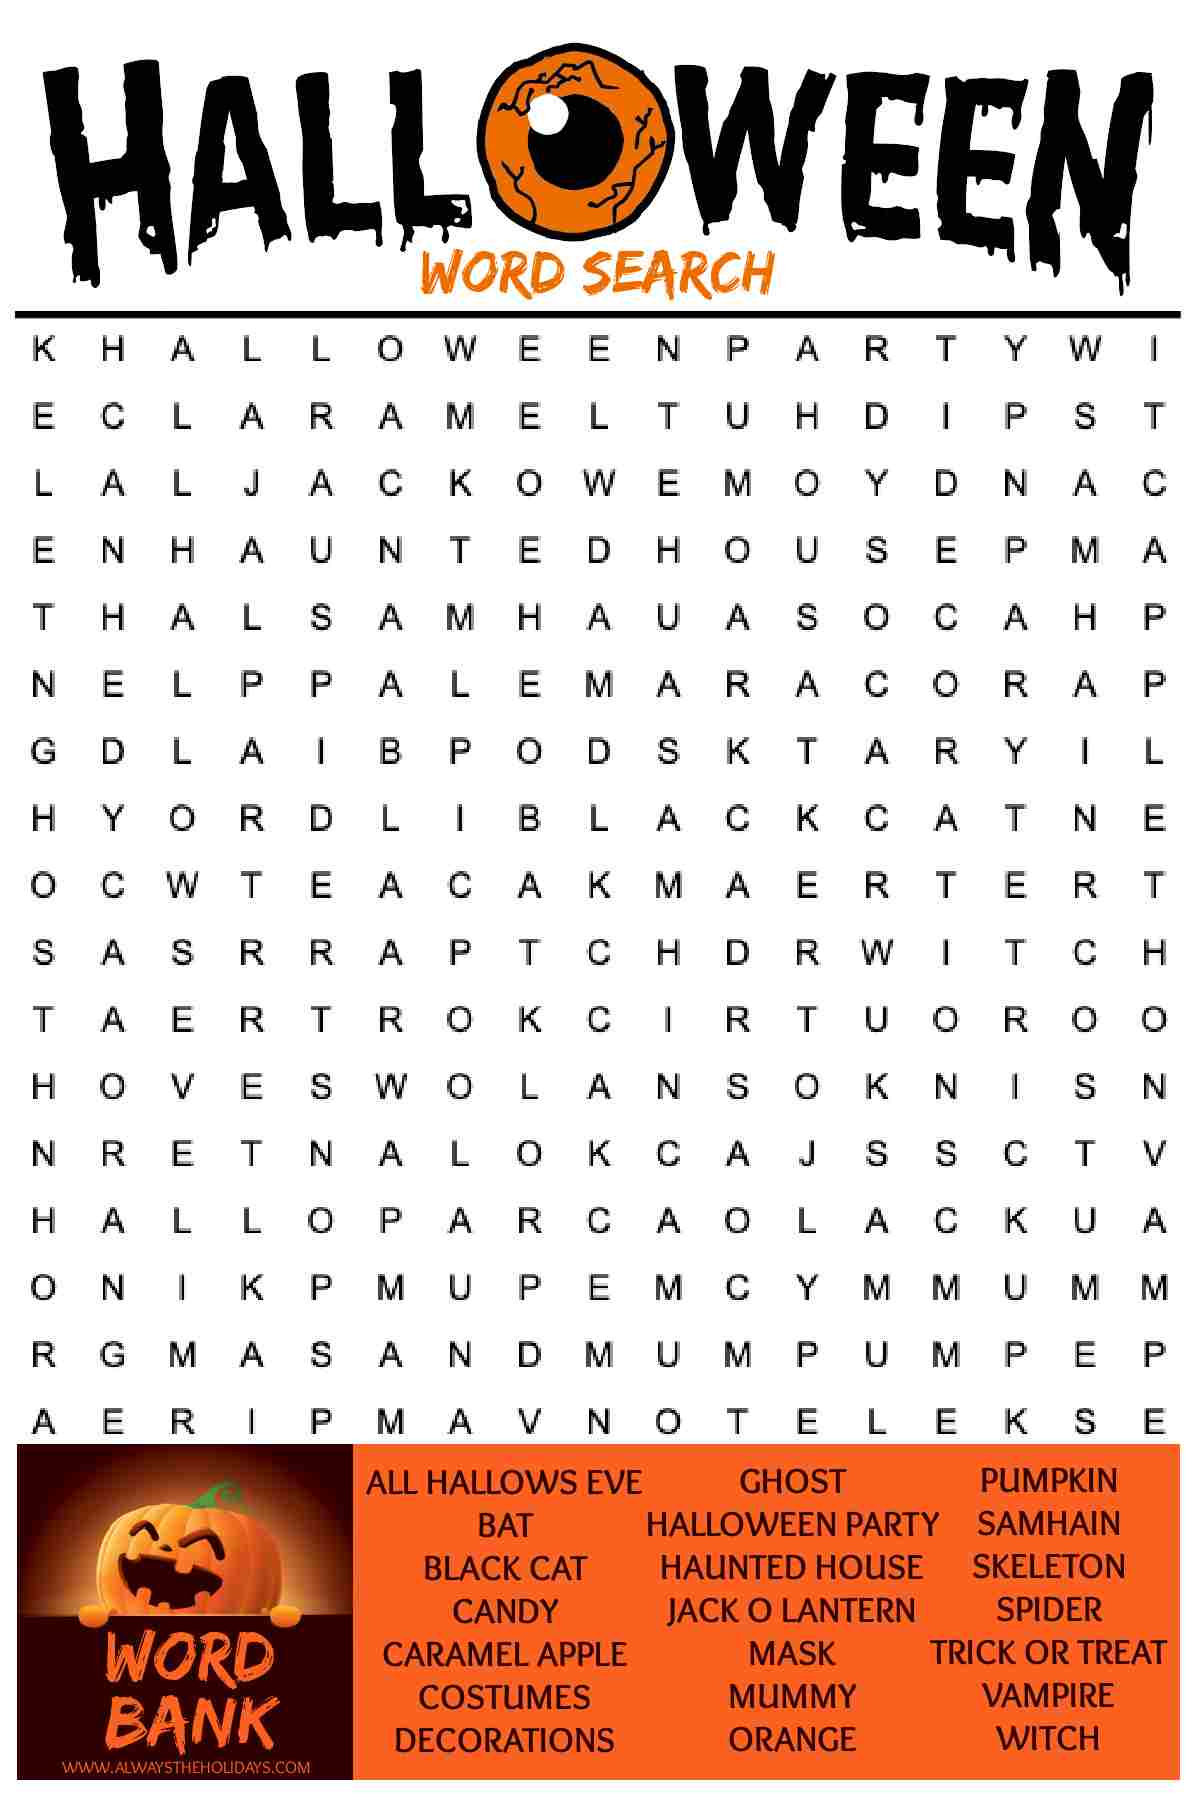 A word find with the word "halloween" at the top, with an eyeball for the "O" above a free Halloween word search printable with a word bank at the bottom.